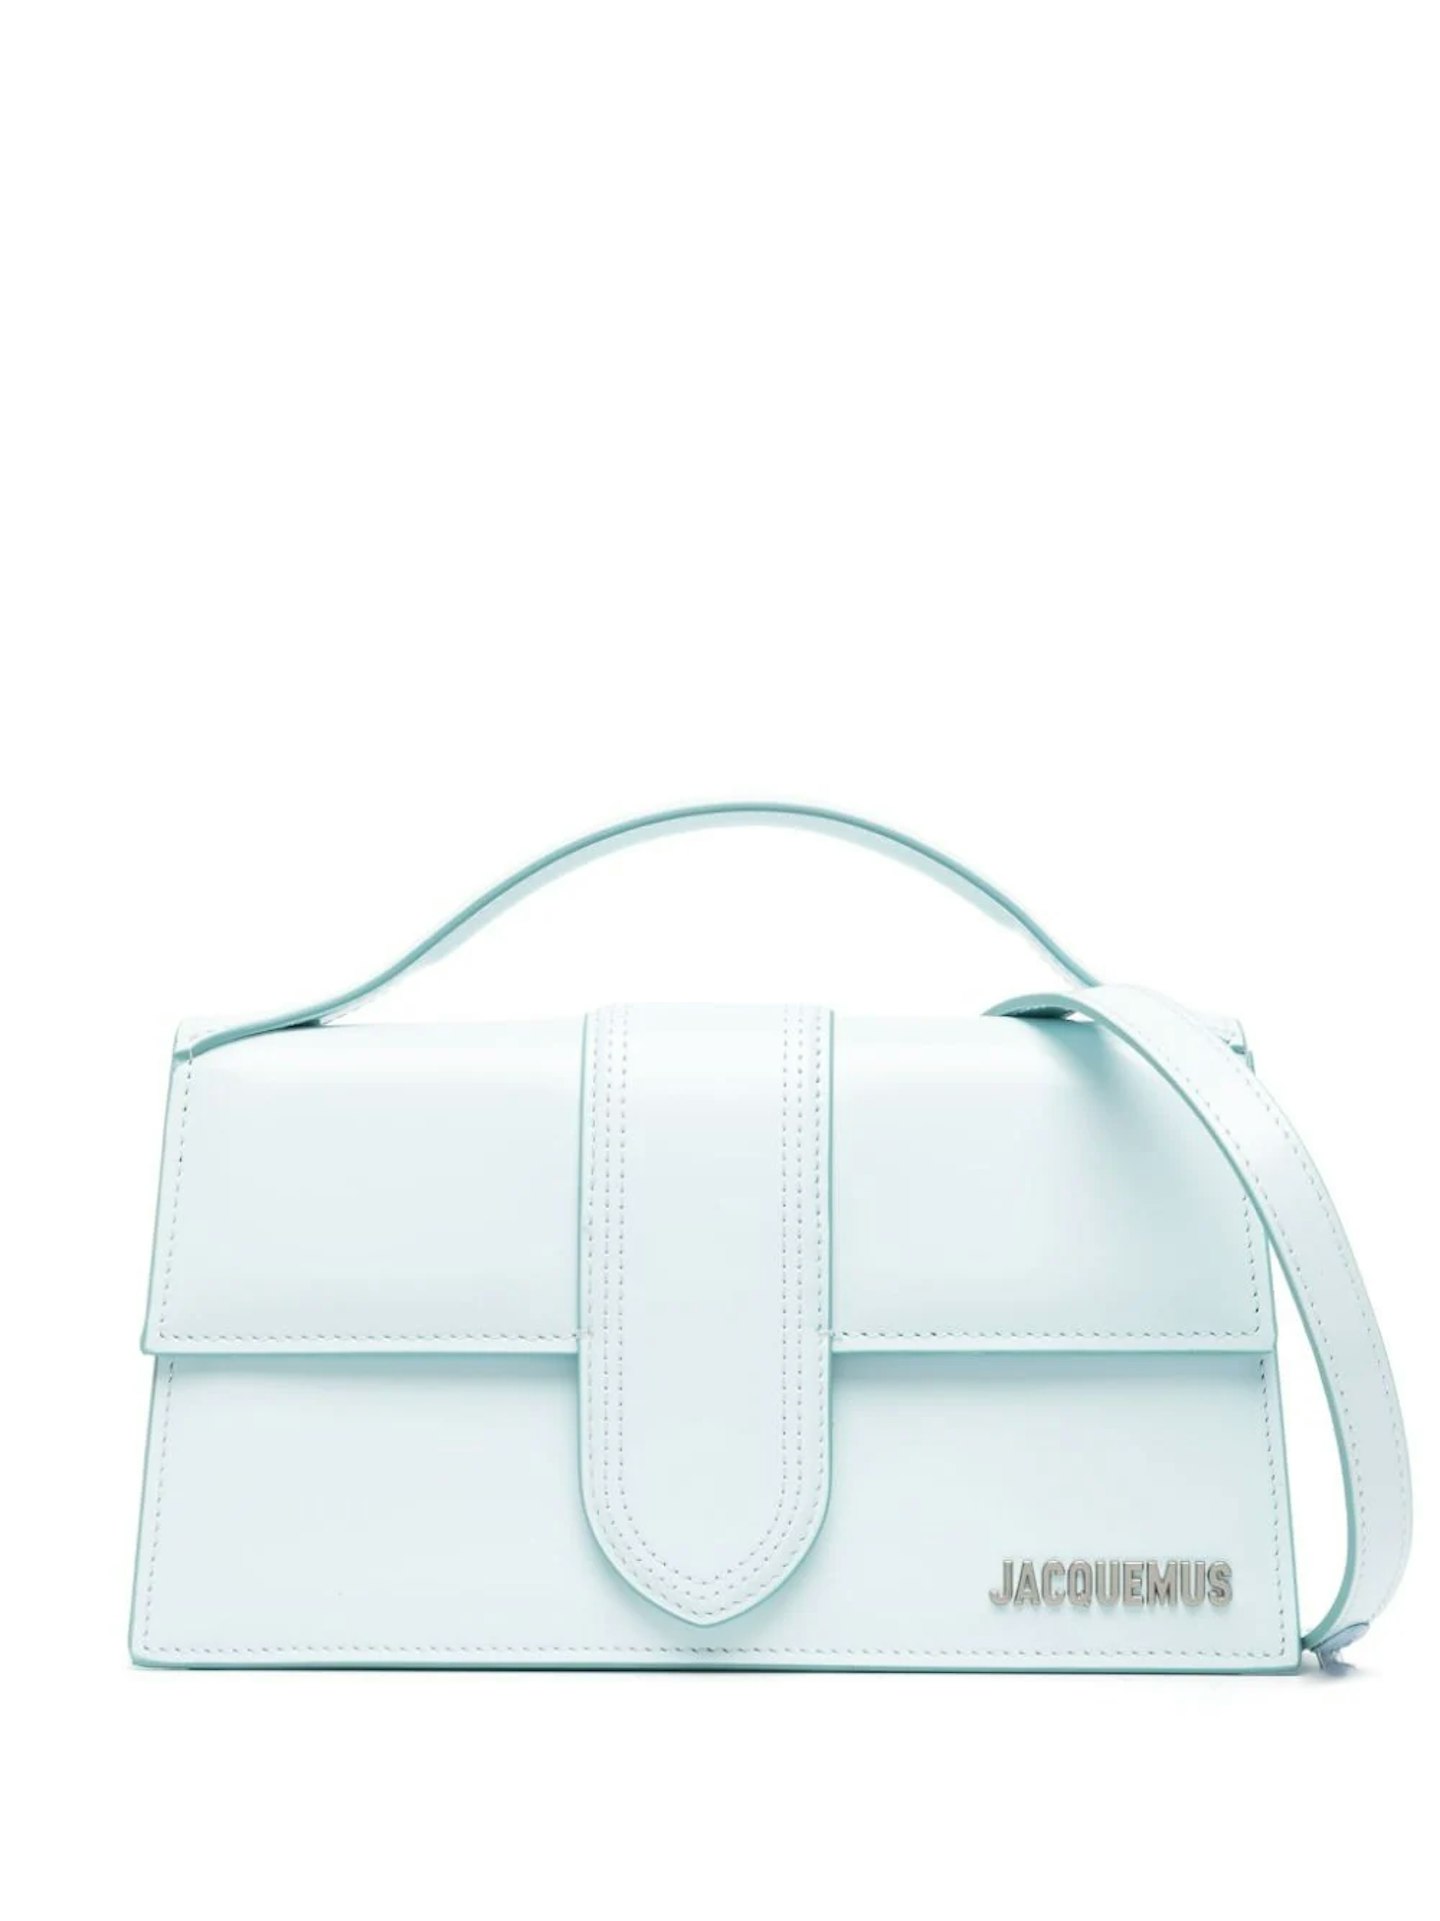 Jacquemus Bambino Leather Tote Bag in Pale Blue